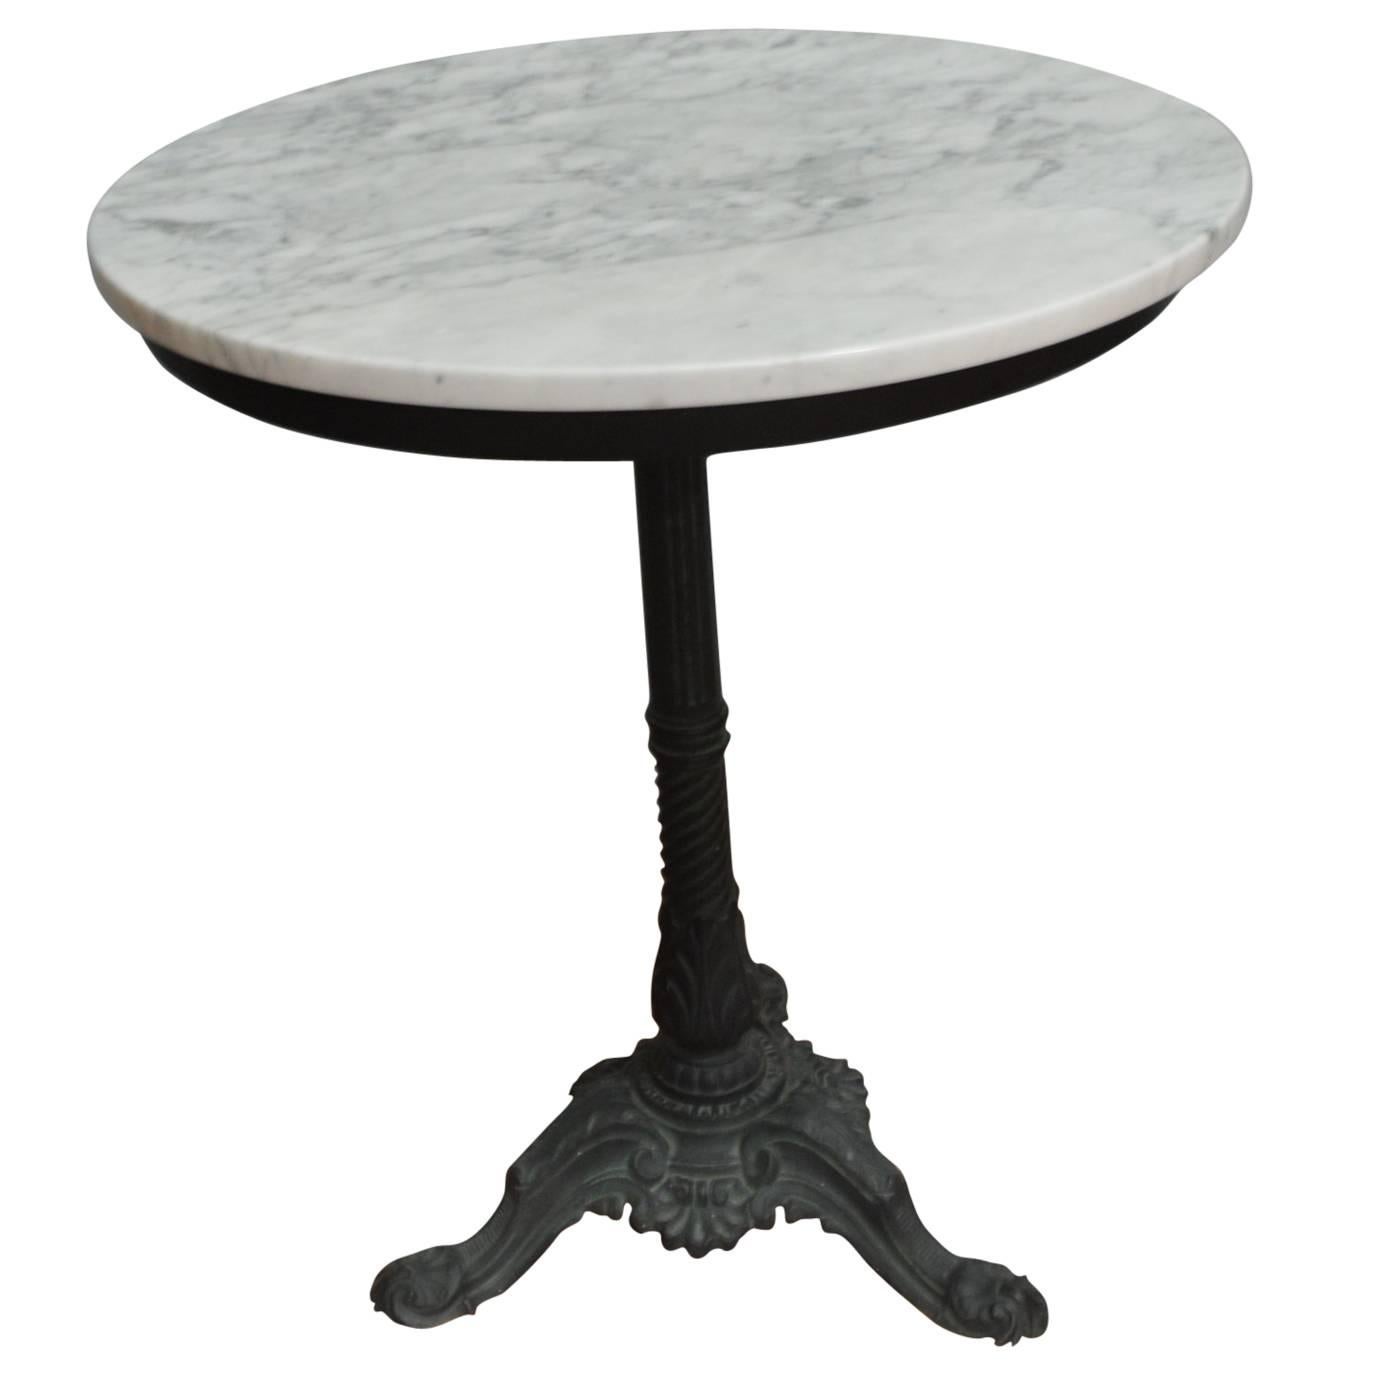 Black Wrought Iron Round French Bistro Table with a White Marble Top For Sale